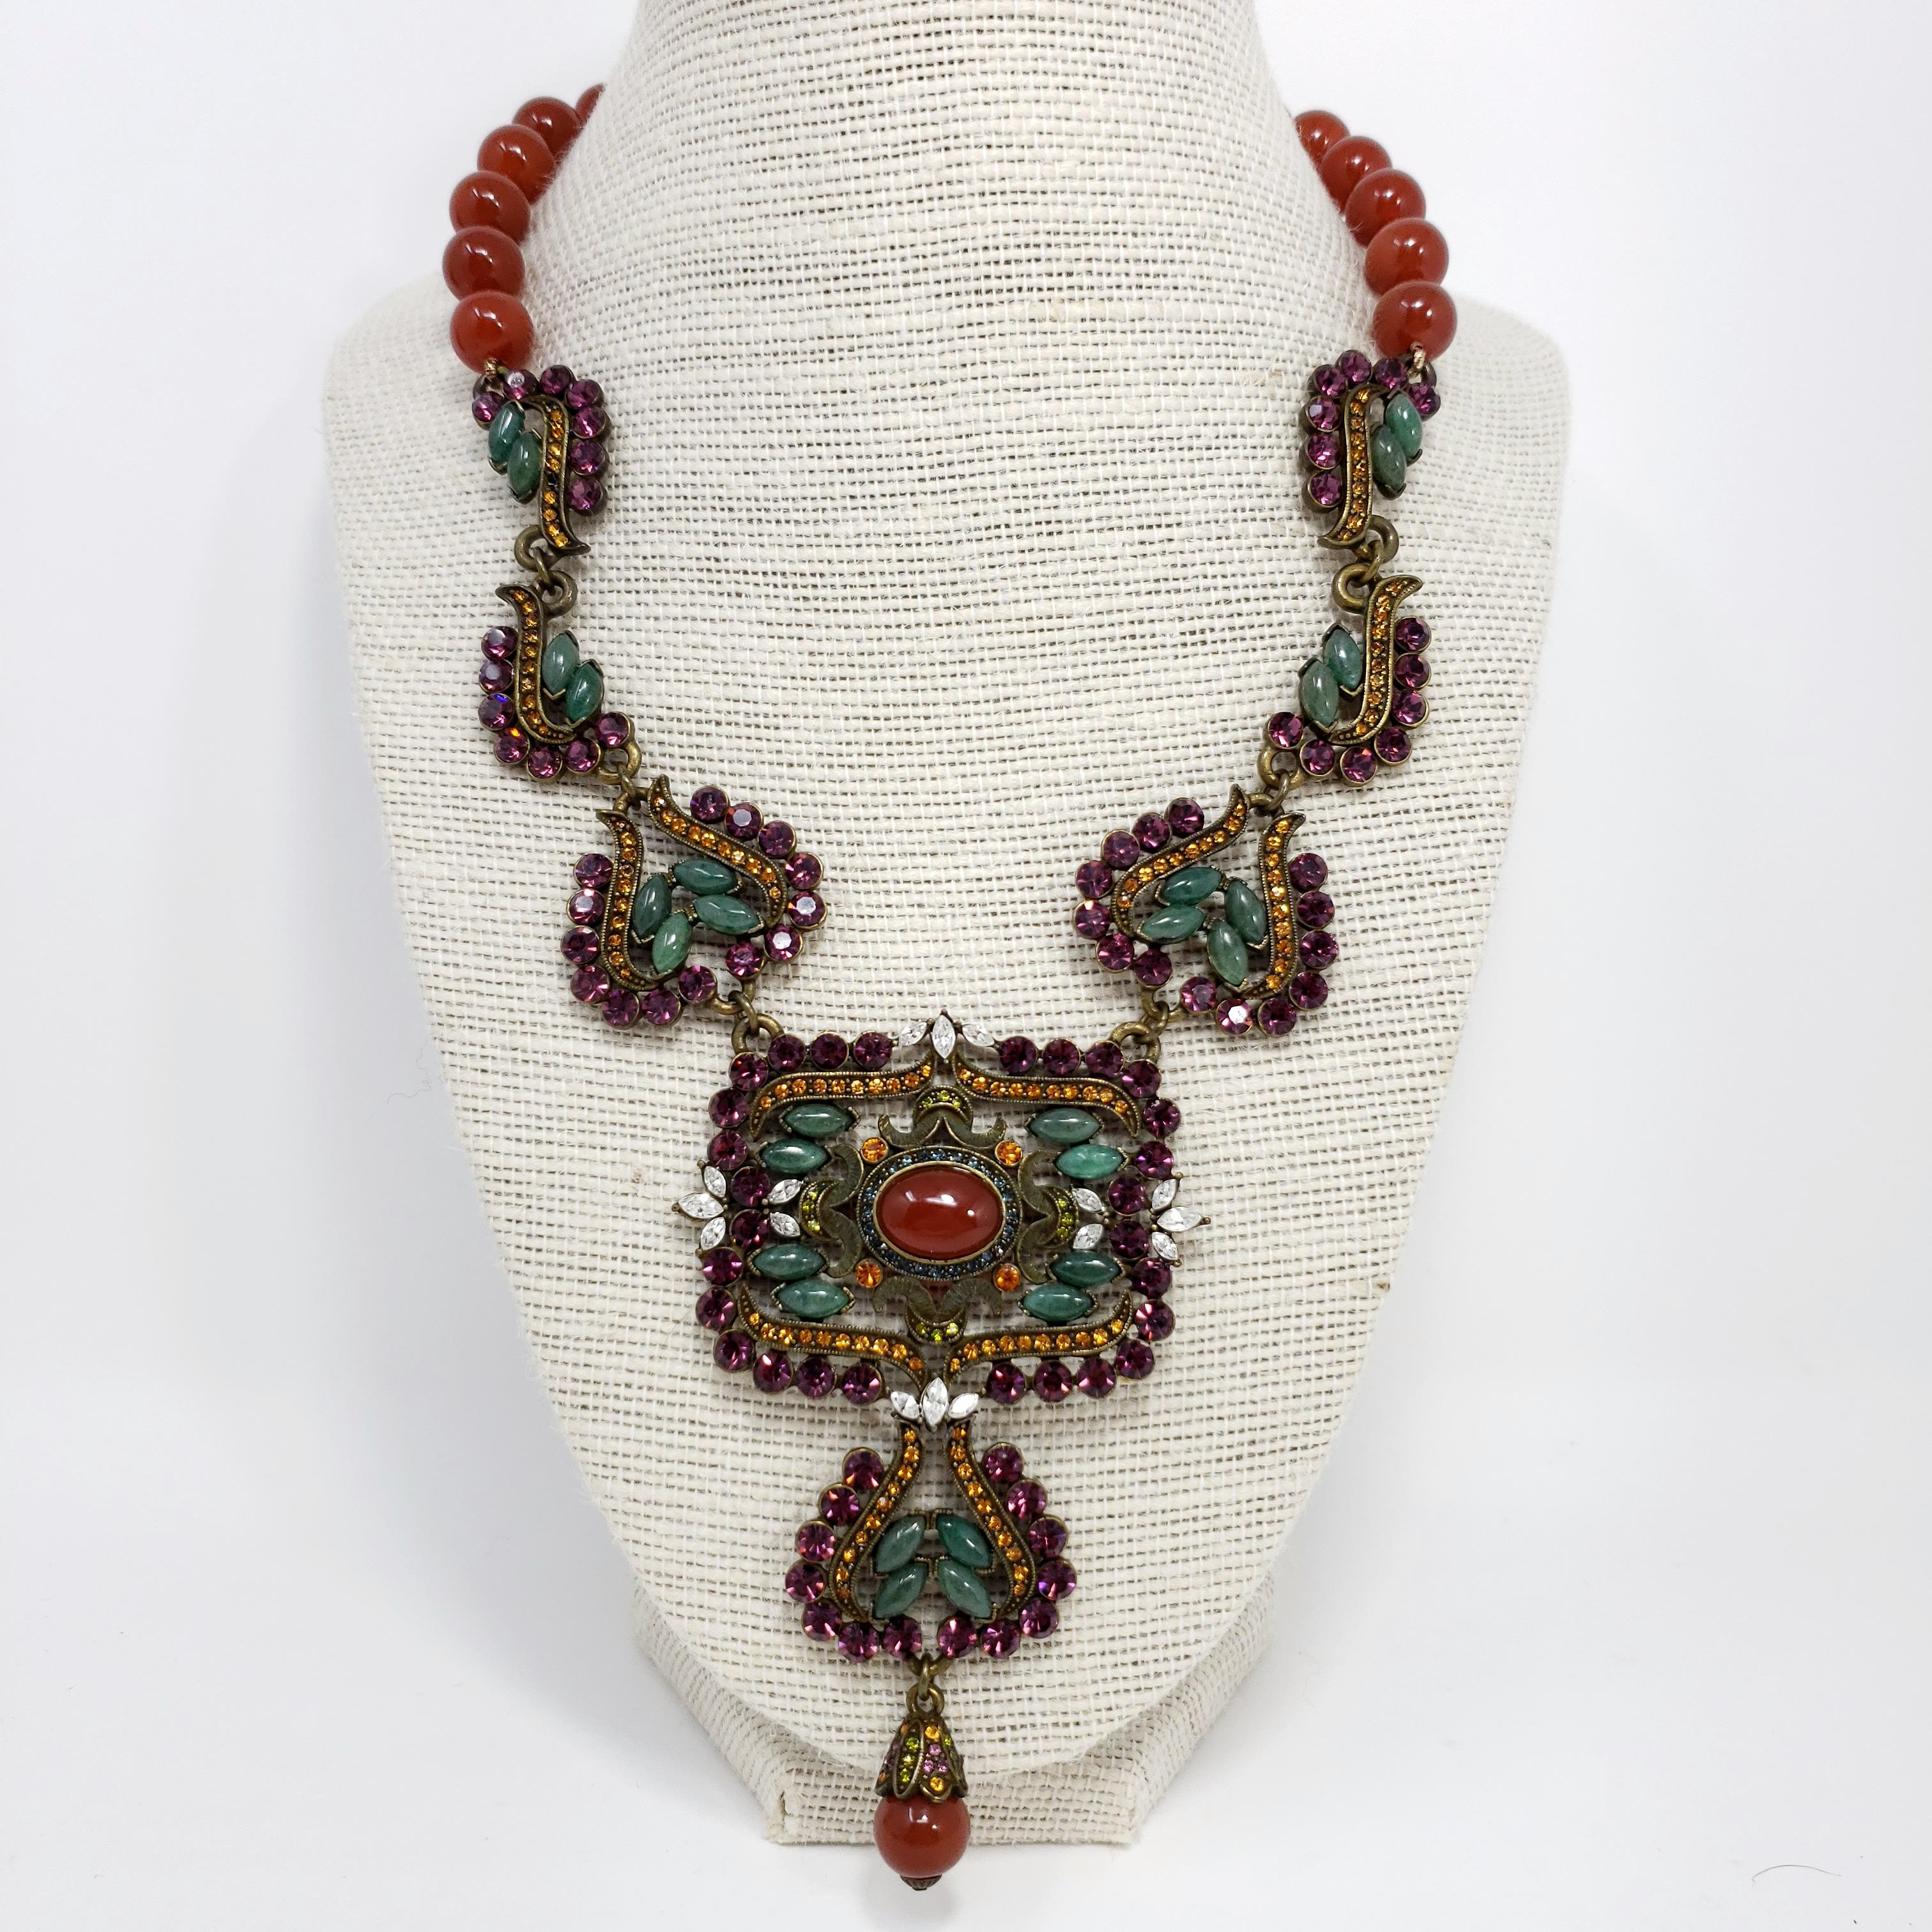 A showstopping necklace from Heidi Daus. This bold pendant necklace features amethyst, jade, & citrine crystals, and natural carnelian beads for a stylish, exotic, look.

Brass tone.

Marks / hallmarks: Heidi Daus, CN

Length: 15 to 18 inches (with